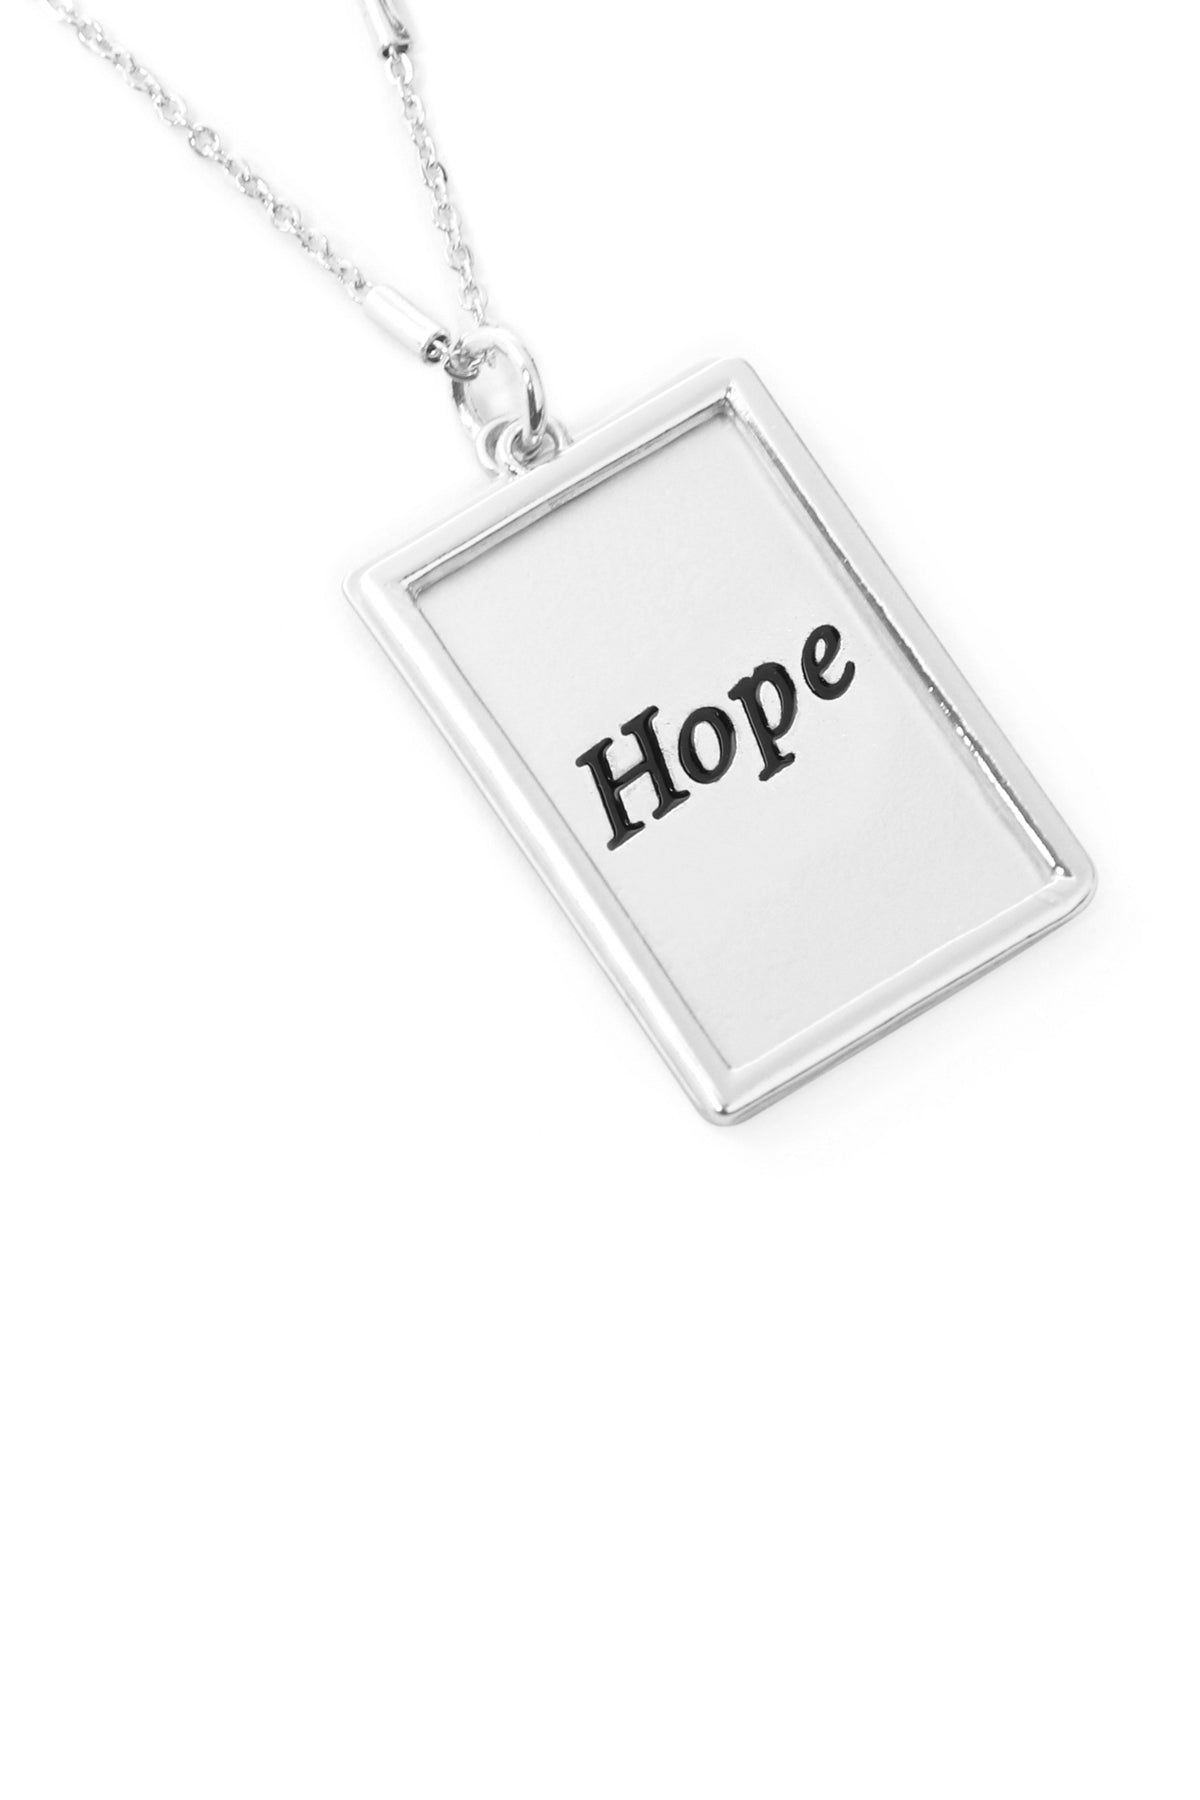 HOPE ETCHED BRASS BOX PENDANT NECKLACE